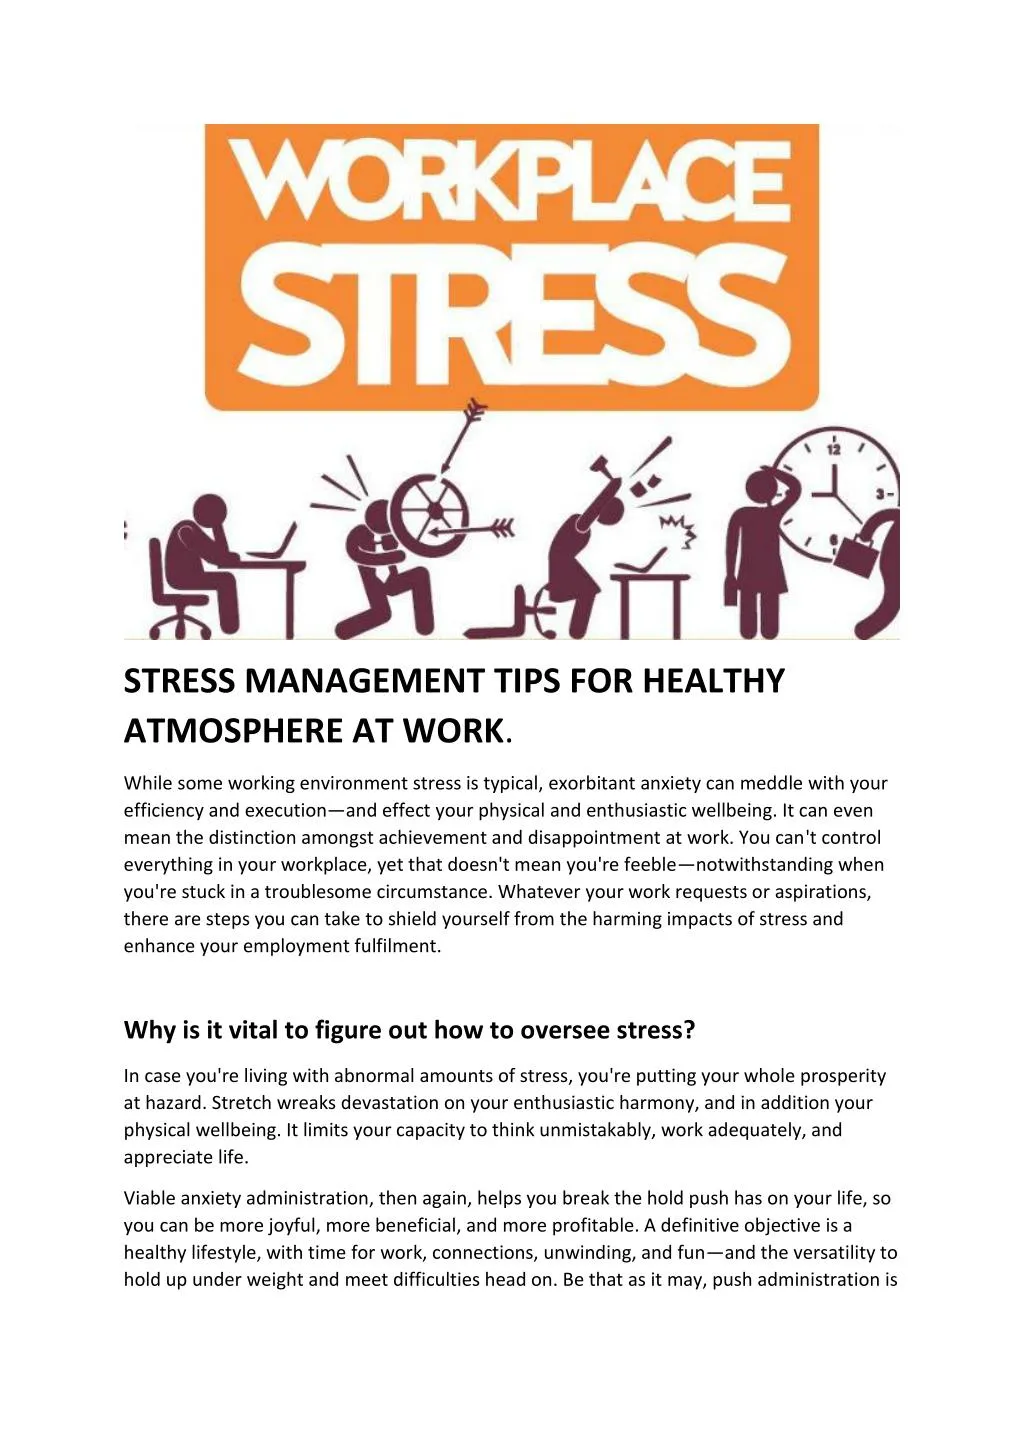 stress management tips for healthy atmosphere